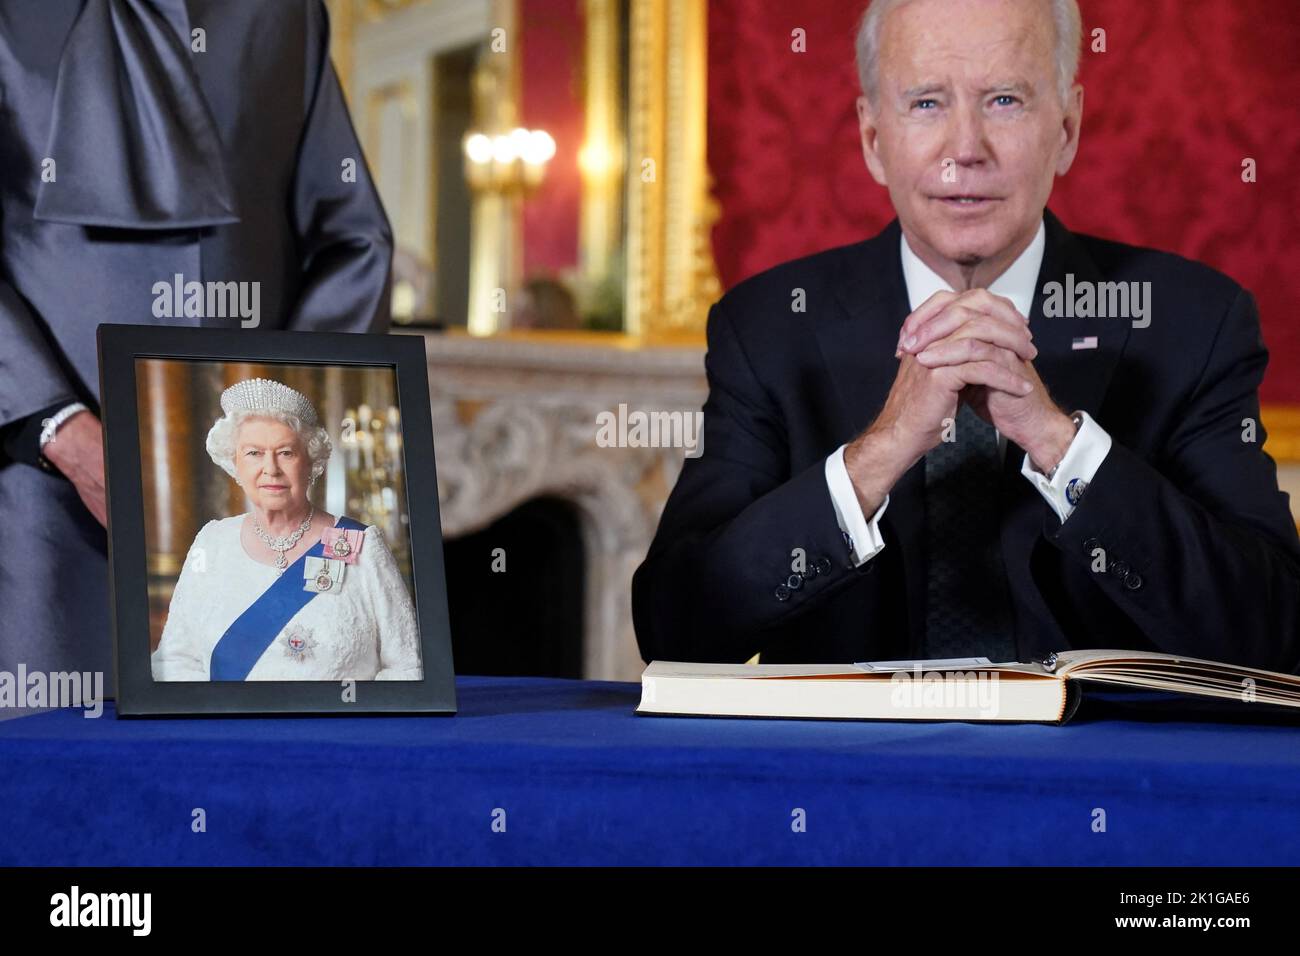 U.S. President Joe Biden prepares to sign a condolence book for Britain's Queen Elizabeth, following her death, at Lancaster House in London, Britain, September 18, 2022. REUTERS/Kevin Lamarque Stock Photo